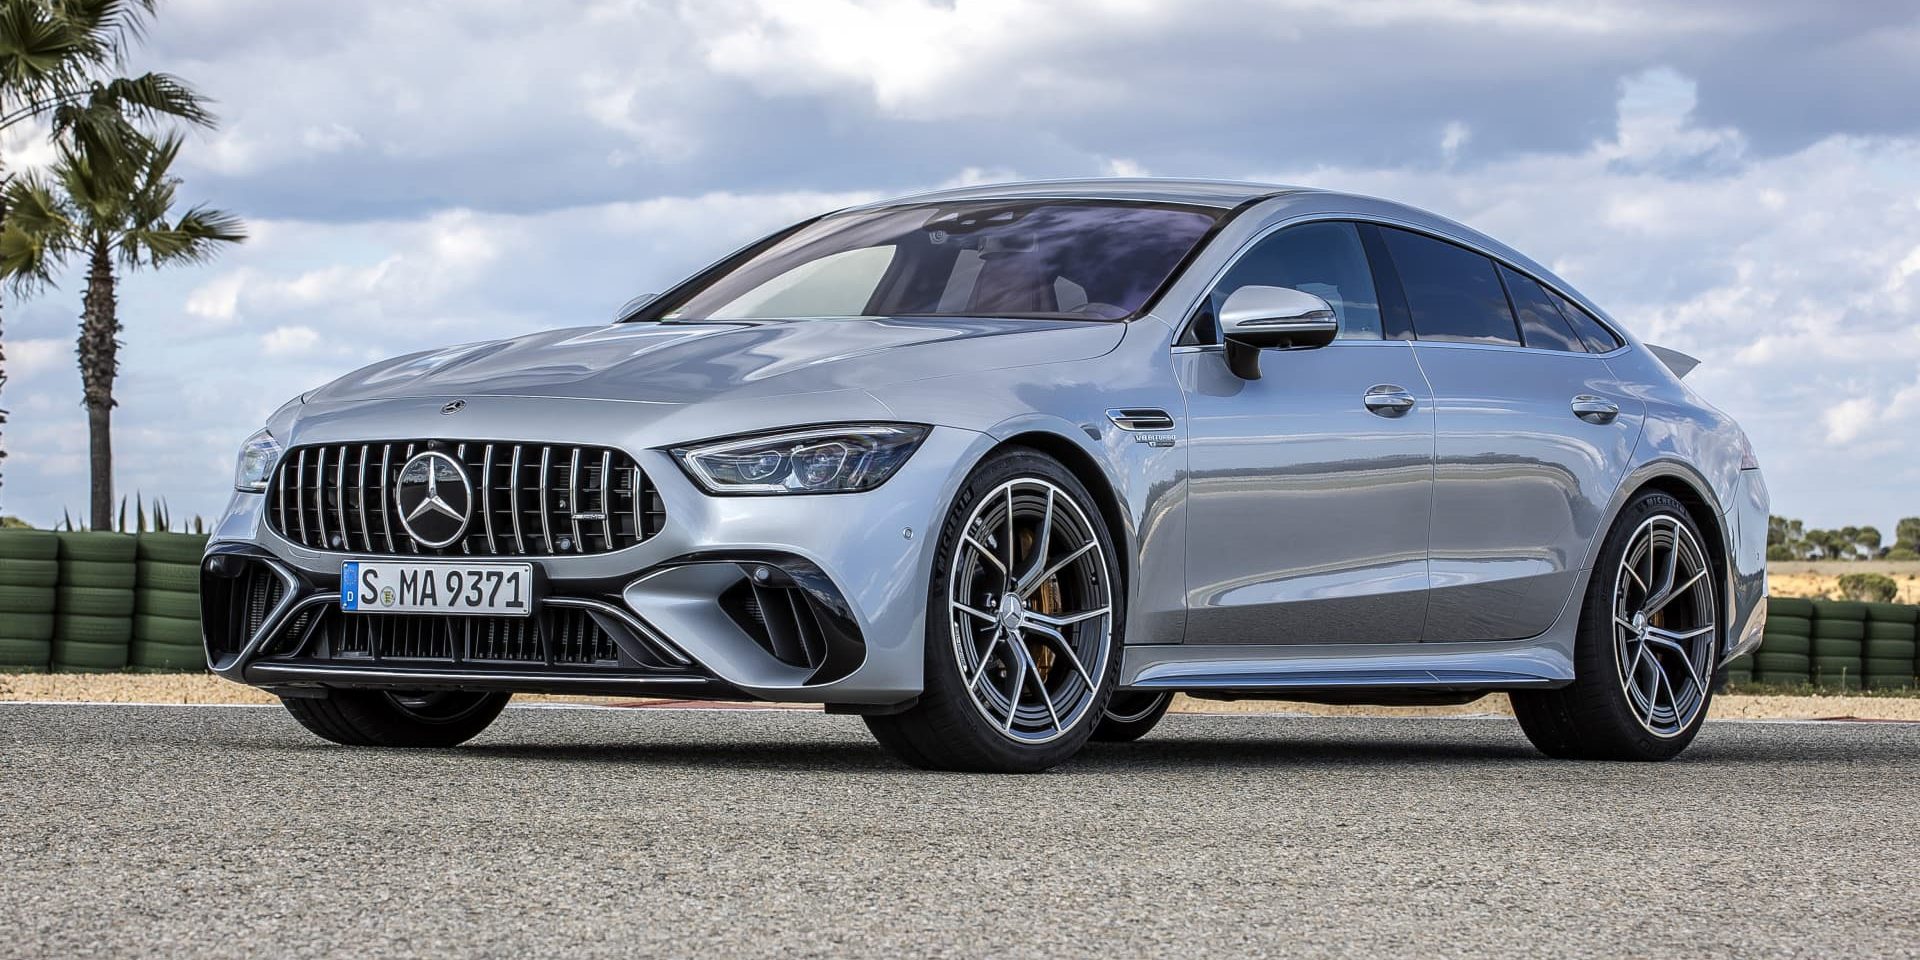 2023 Mercedes-AMG GT63 S E Performance price and specs: Hybrid super sedan from $399,900